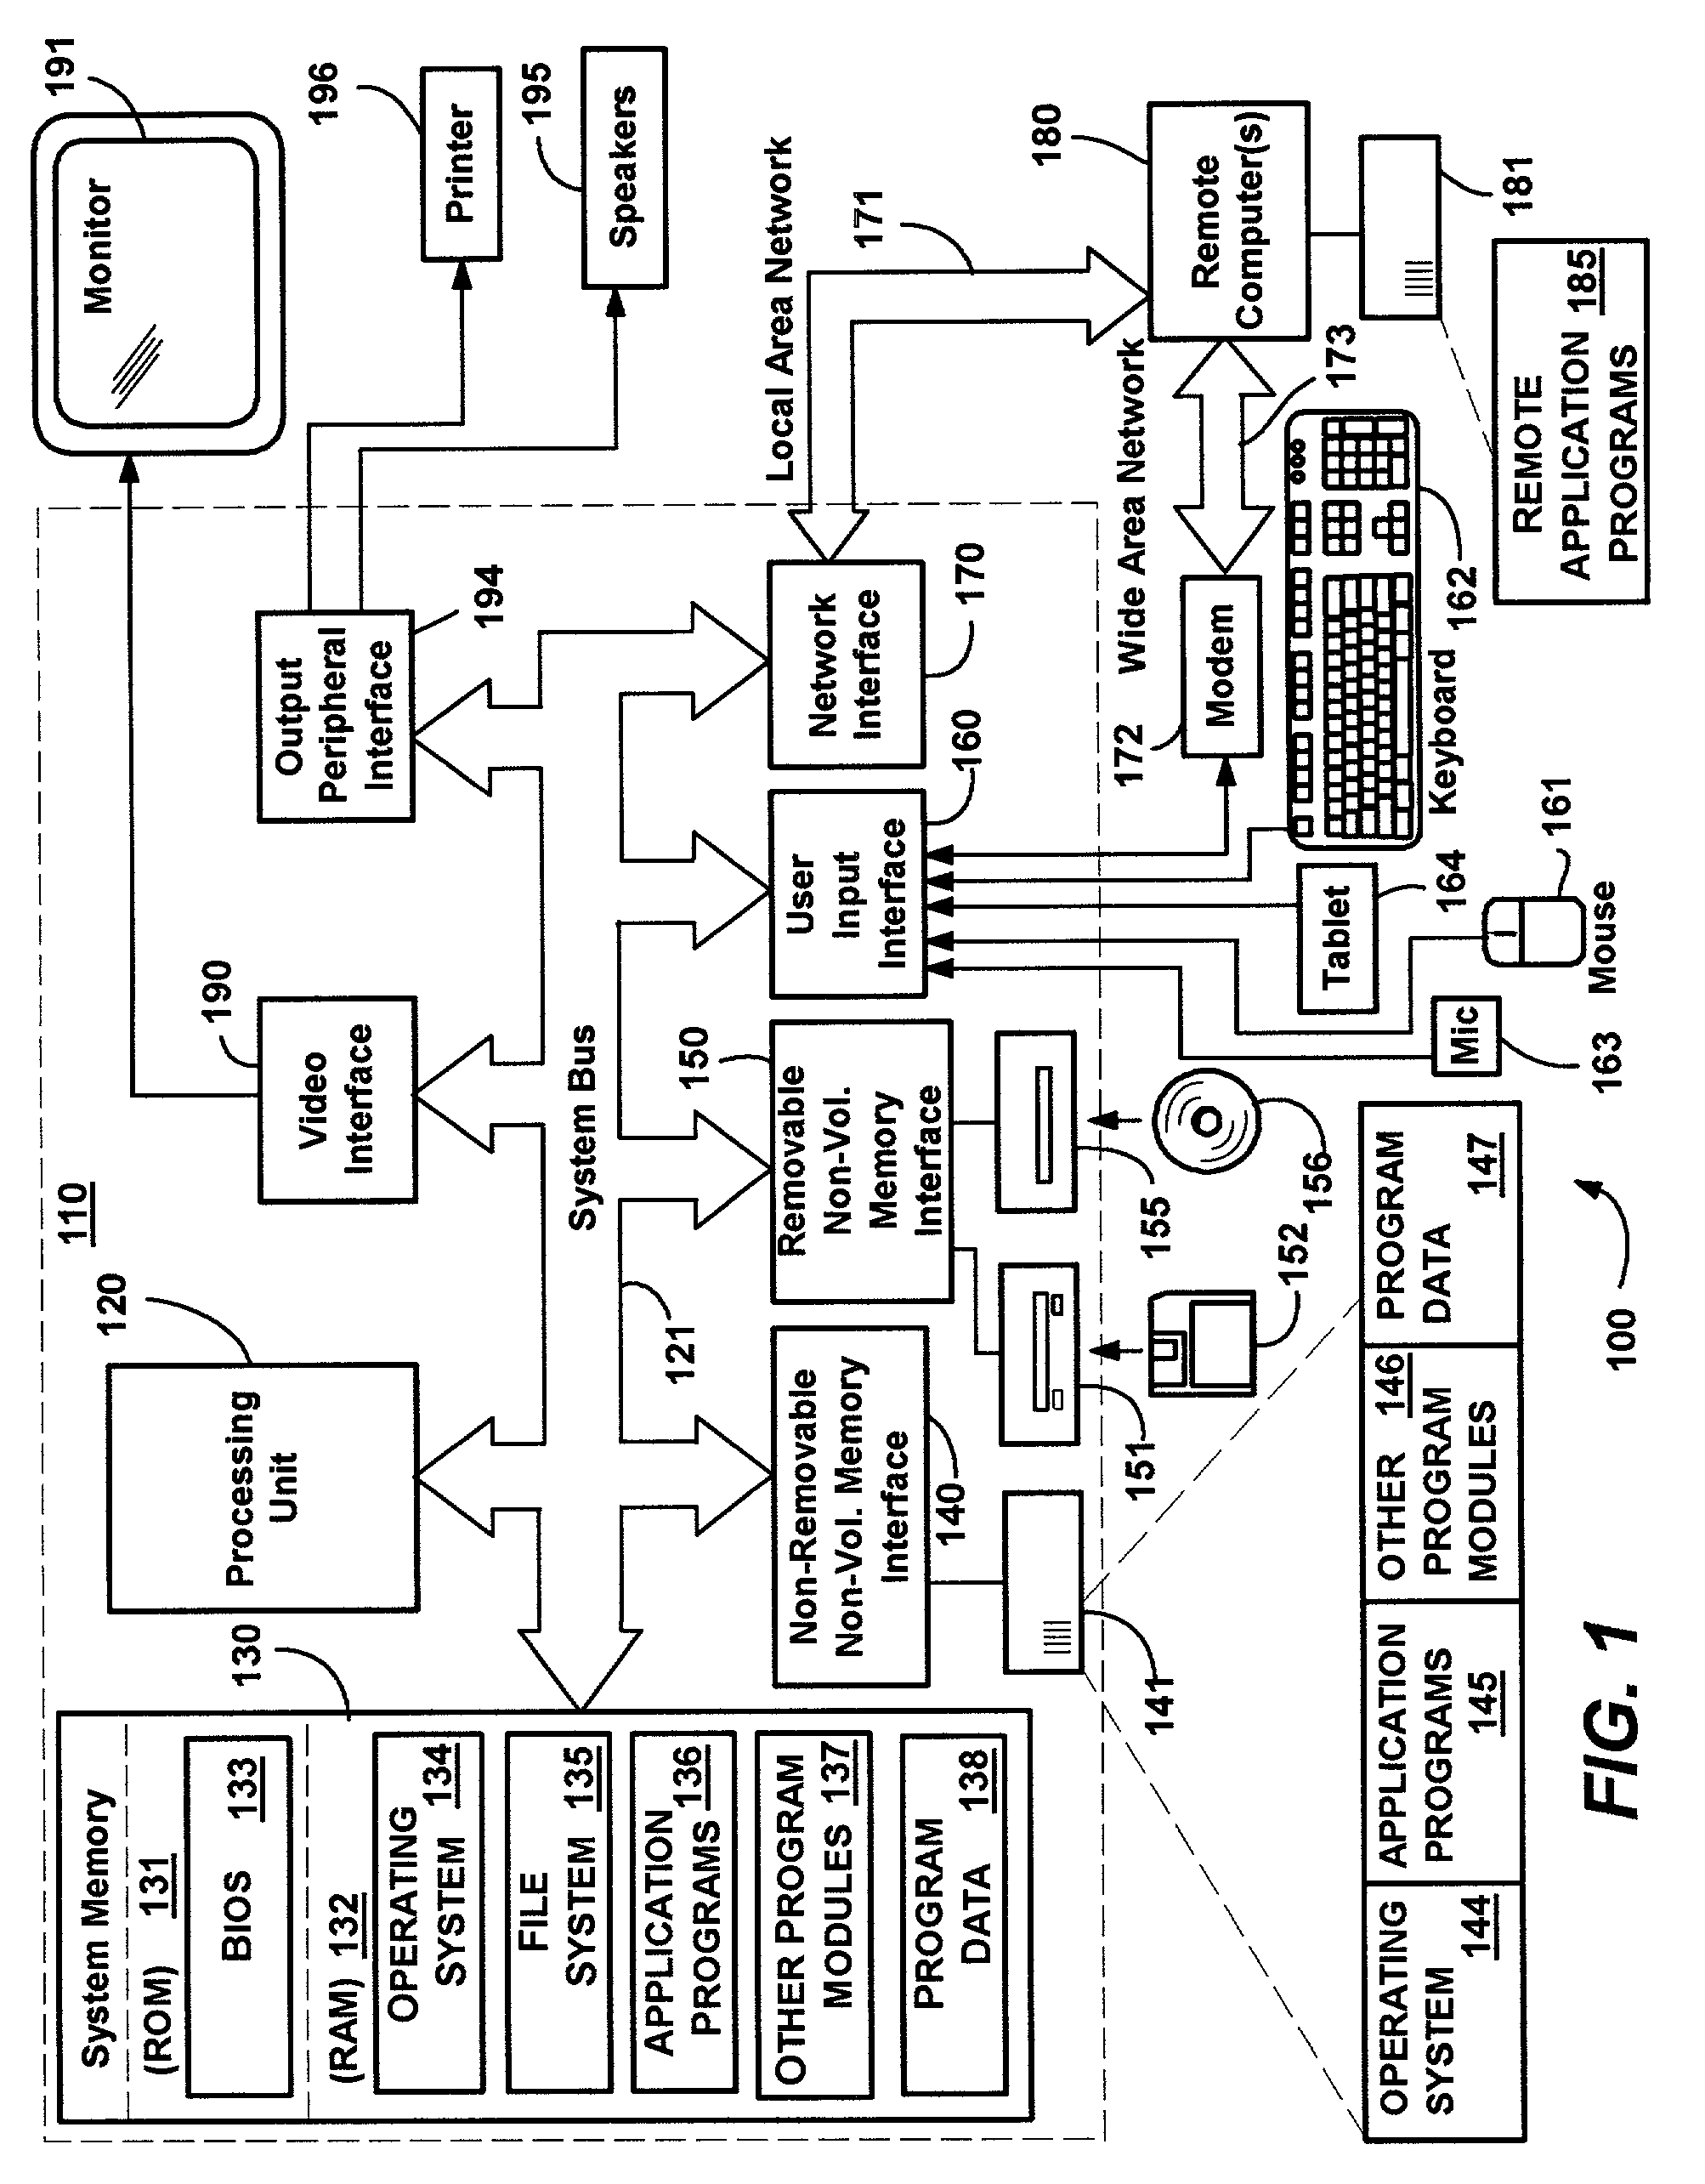 System and method for providing transparent access to distributed authoring and versioning files including encrypted files